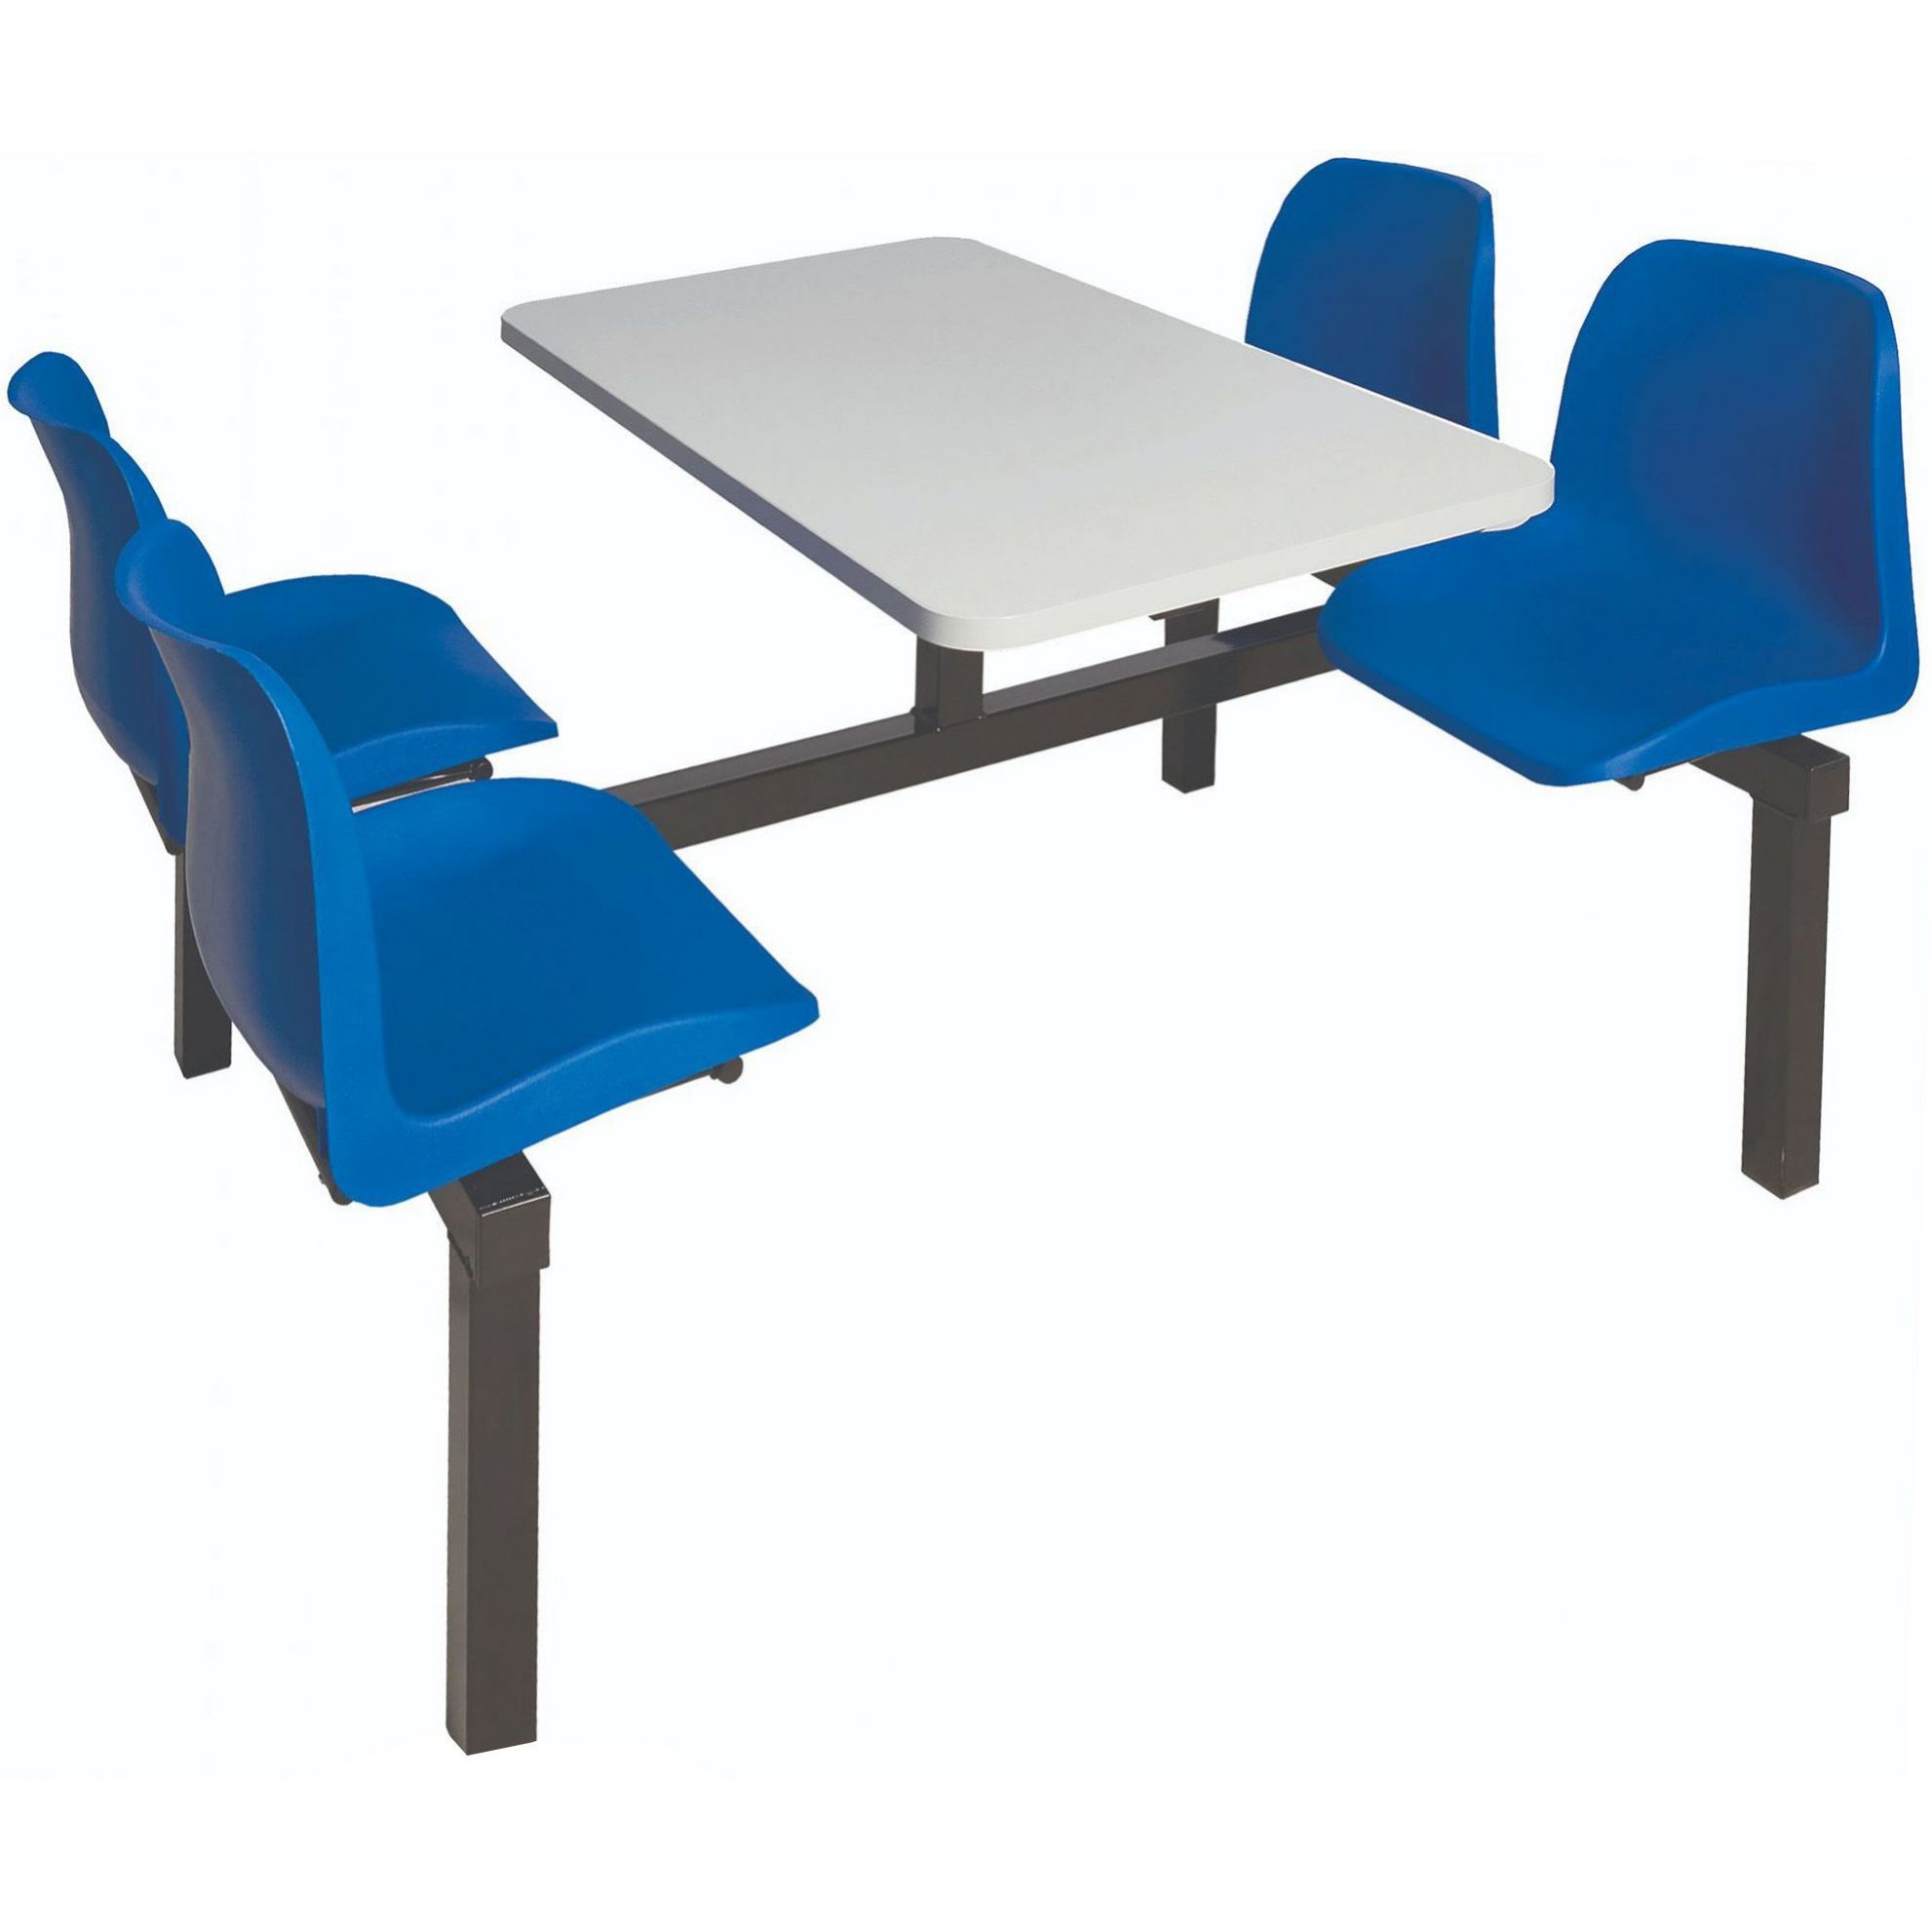 GS-INDUSTRIES 4 SEATER DOUBLE ENTRY CANTEEN FURNITURE TABLE AND CHAIRS Blue